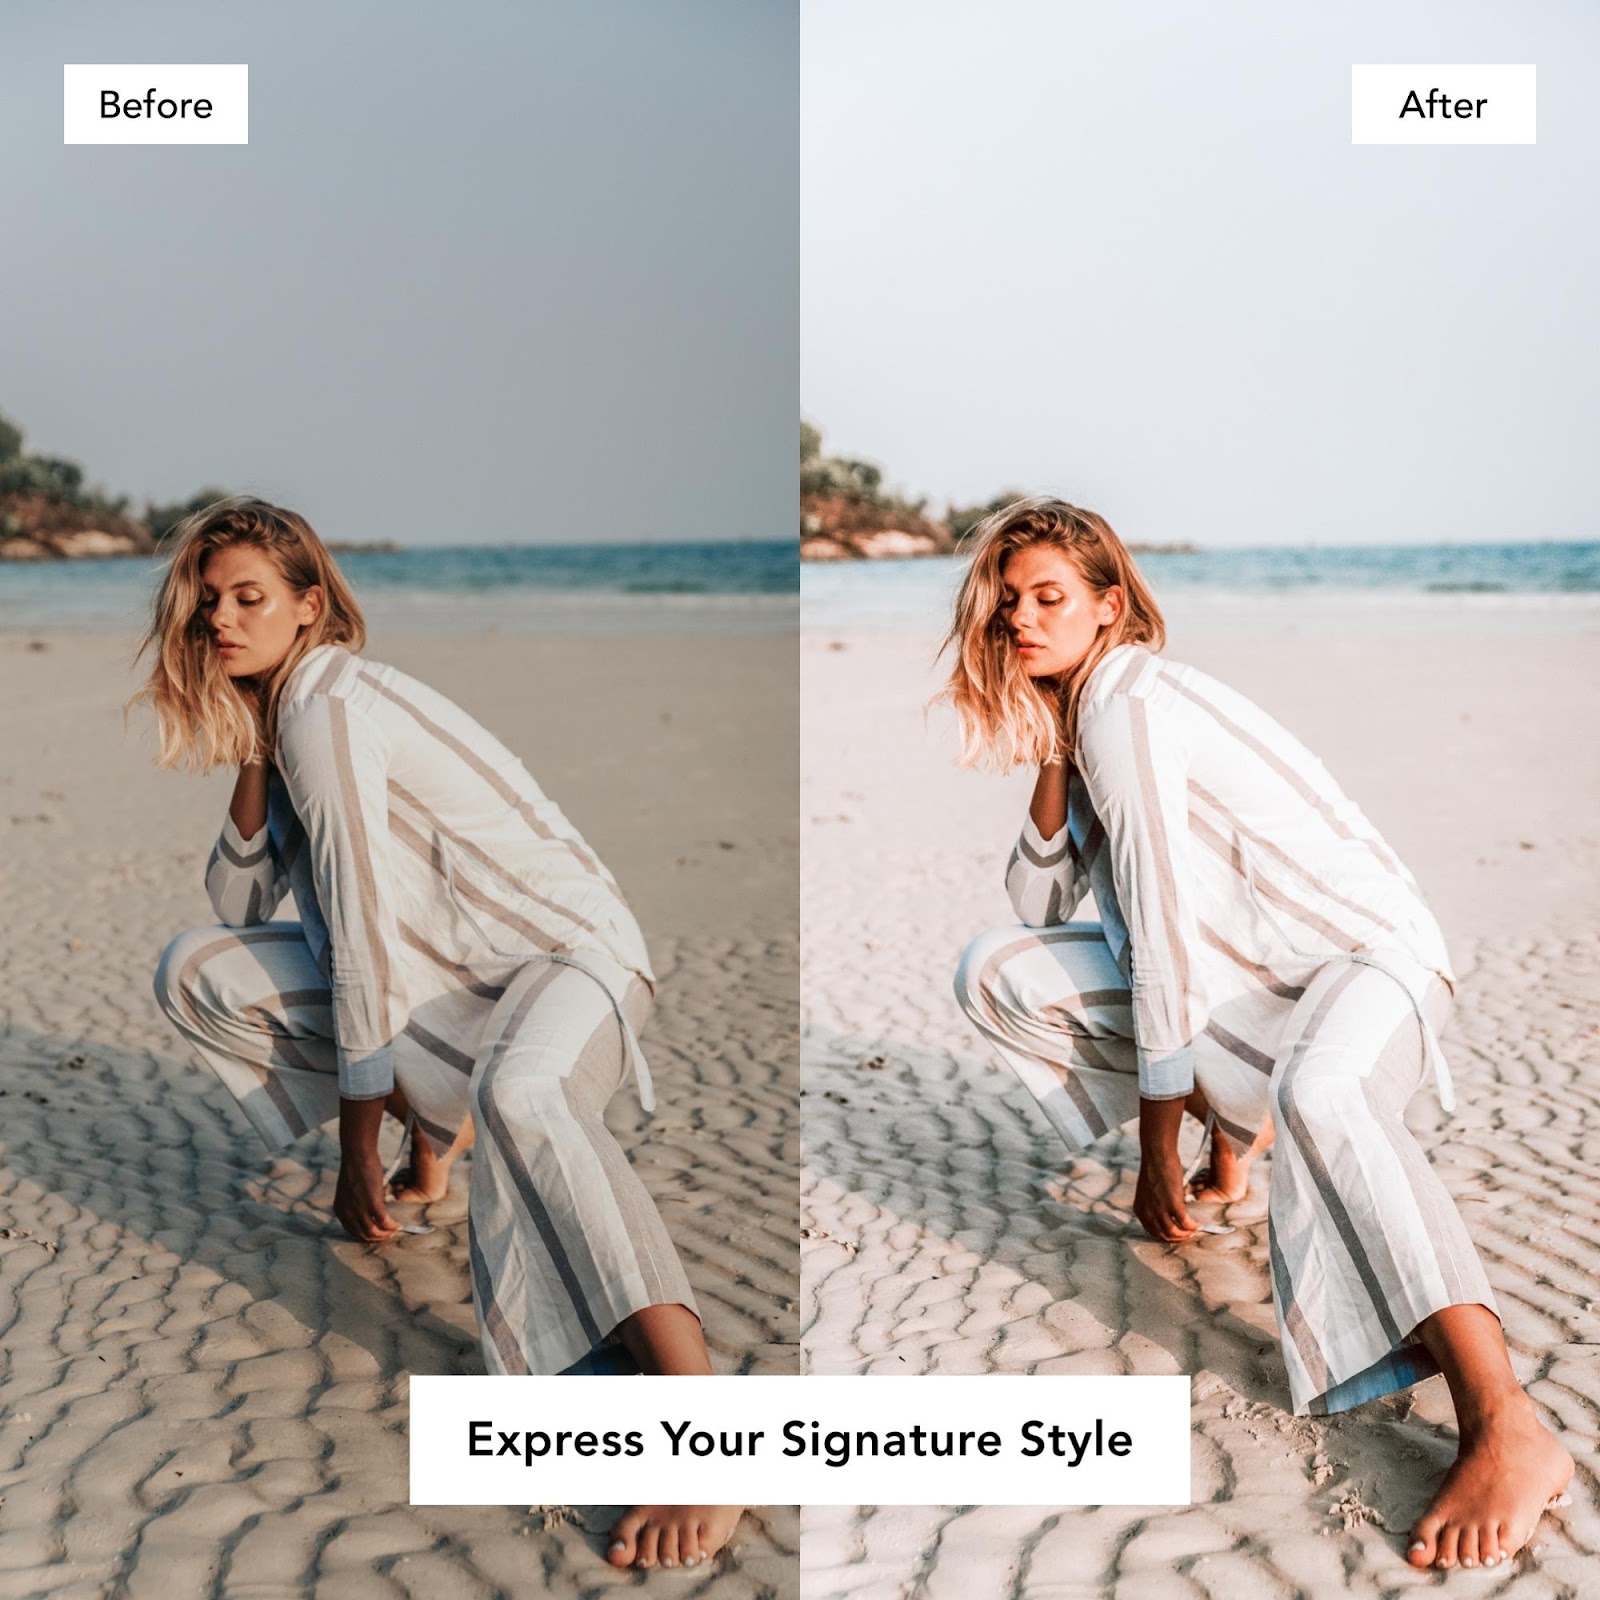 insta cream flourish presets cover grid before after